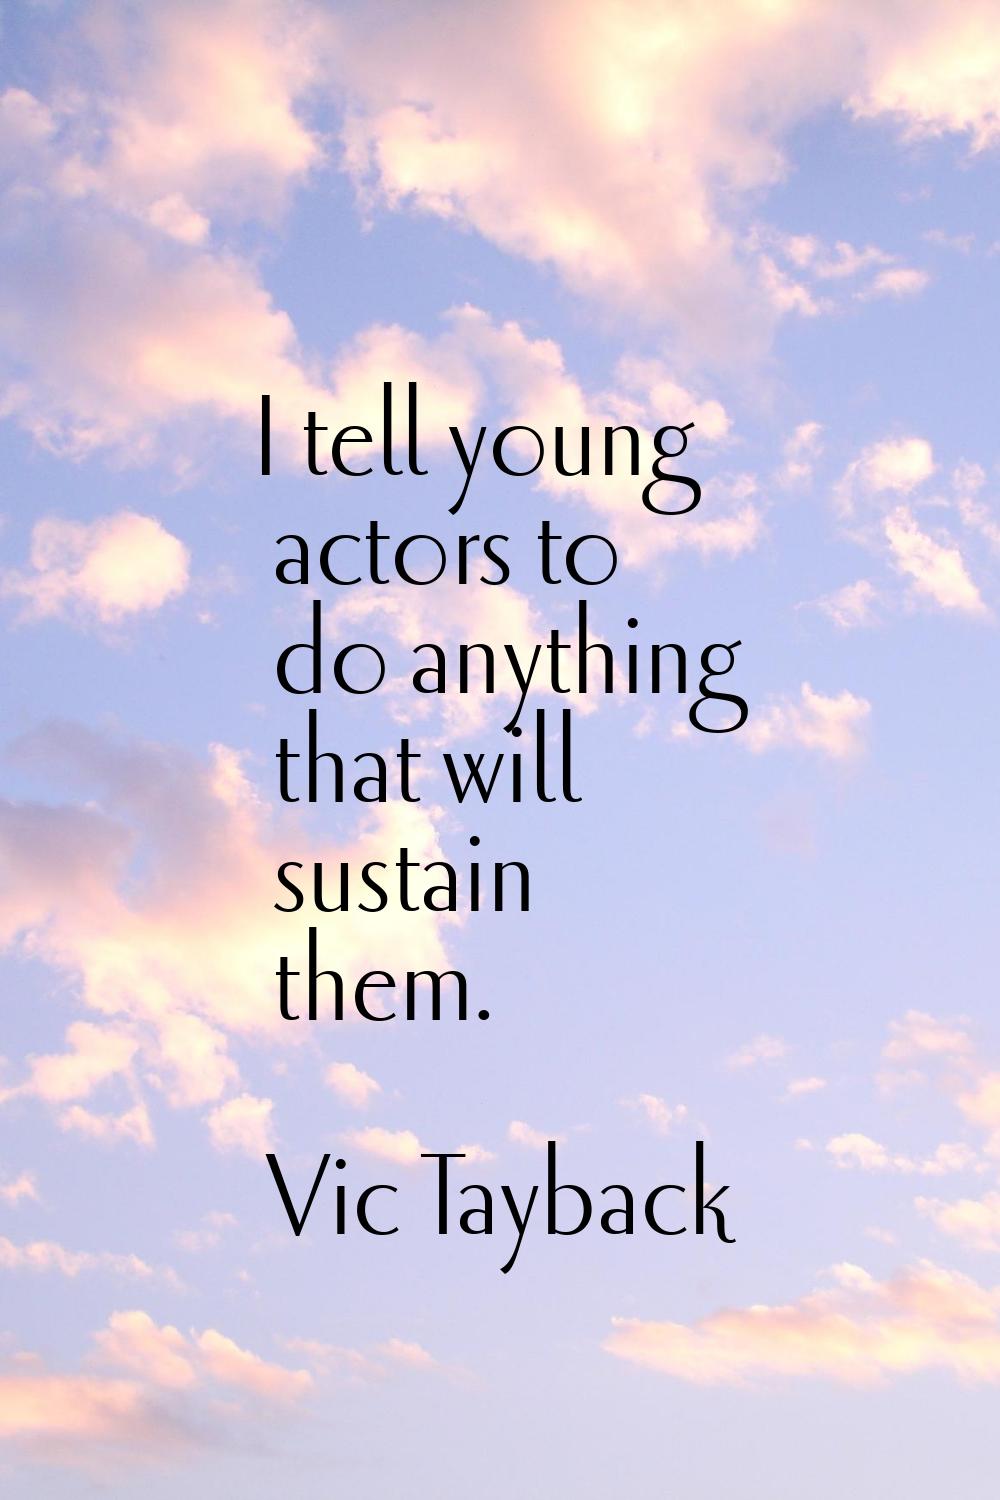 I tell young actors to do anything that will sustain them.